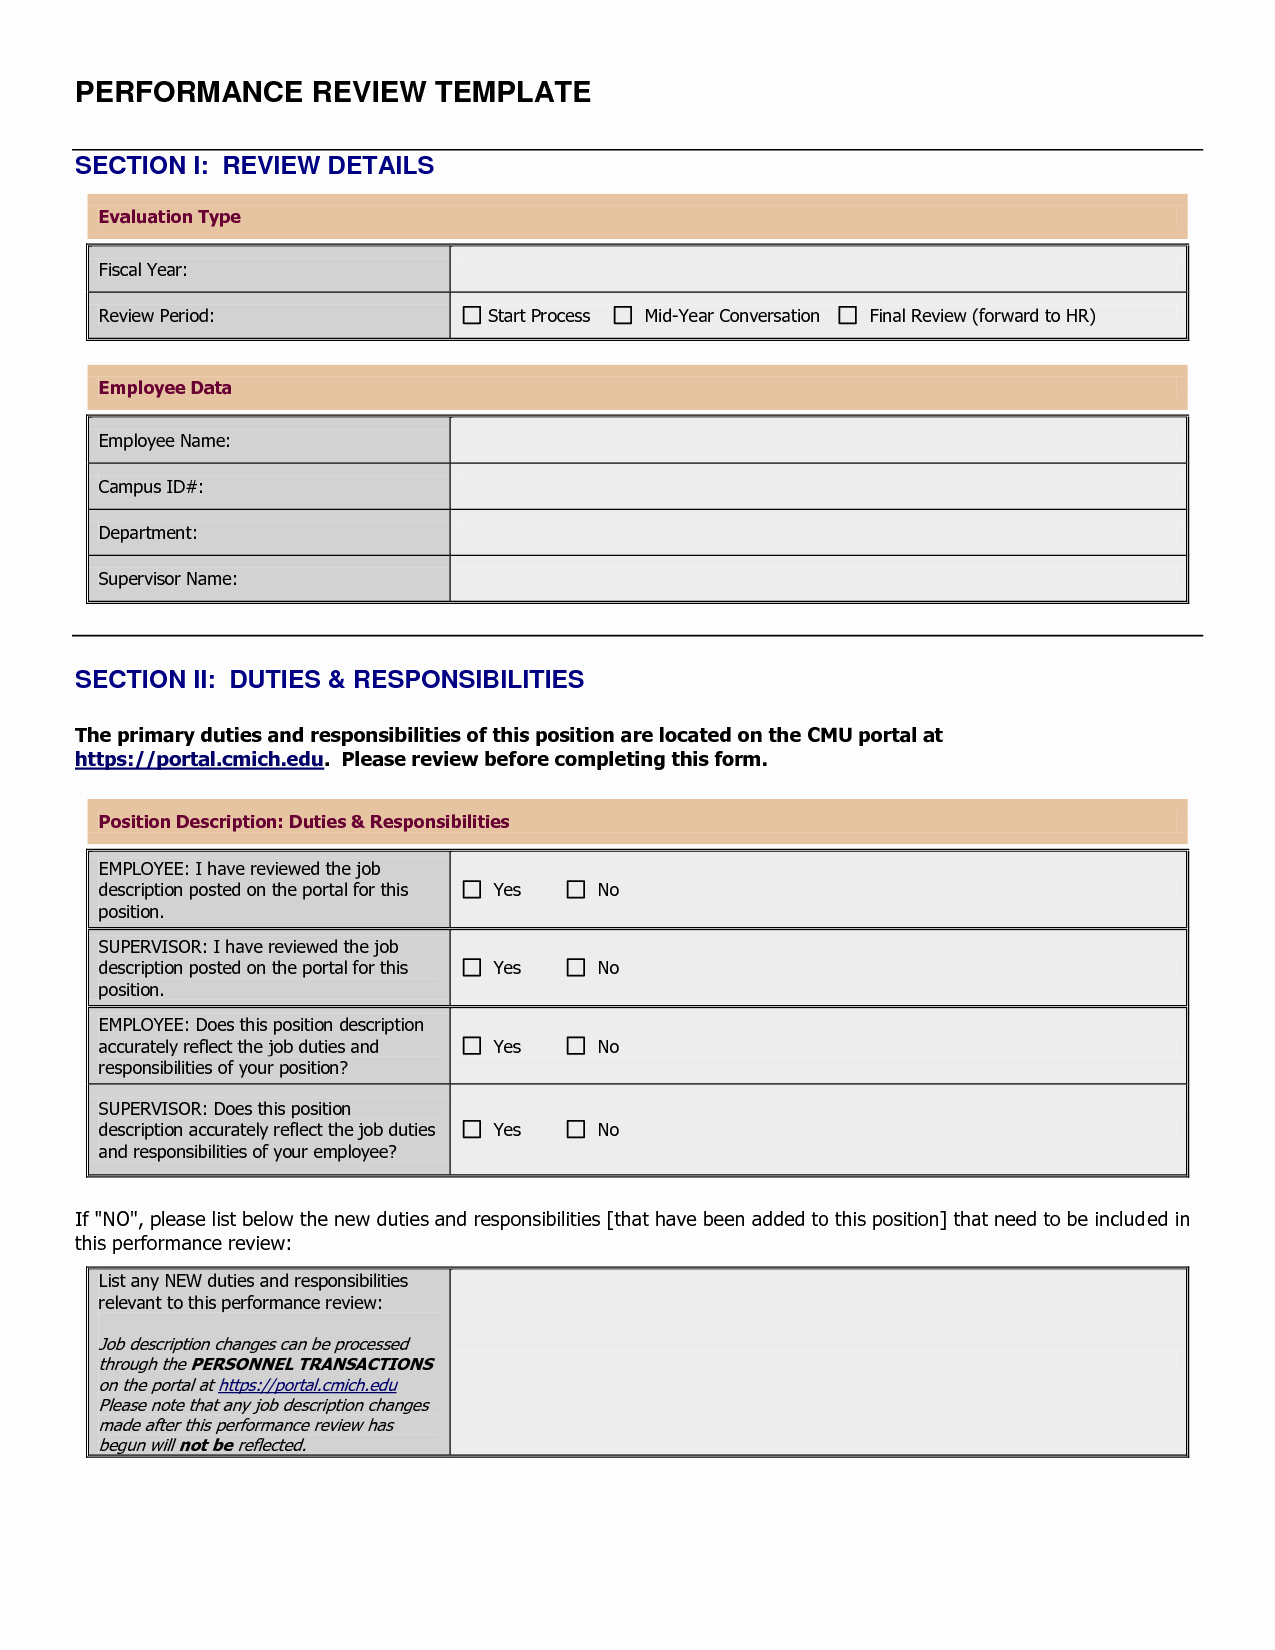 Performance Review form Template Luxury Appraisal Template Staff Document 31 Performance